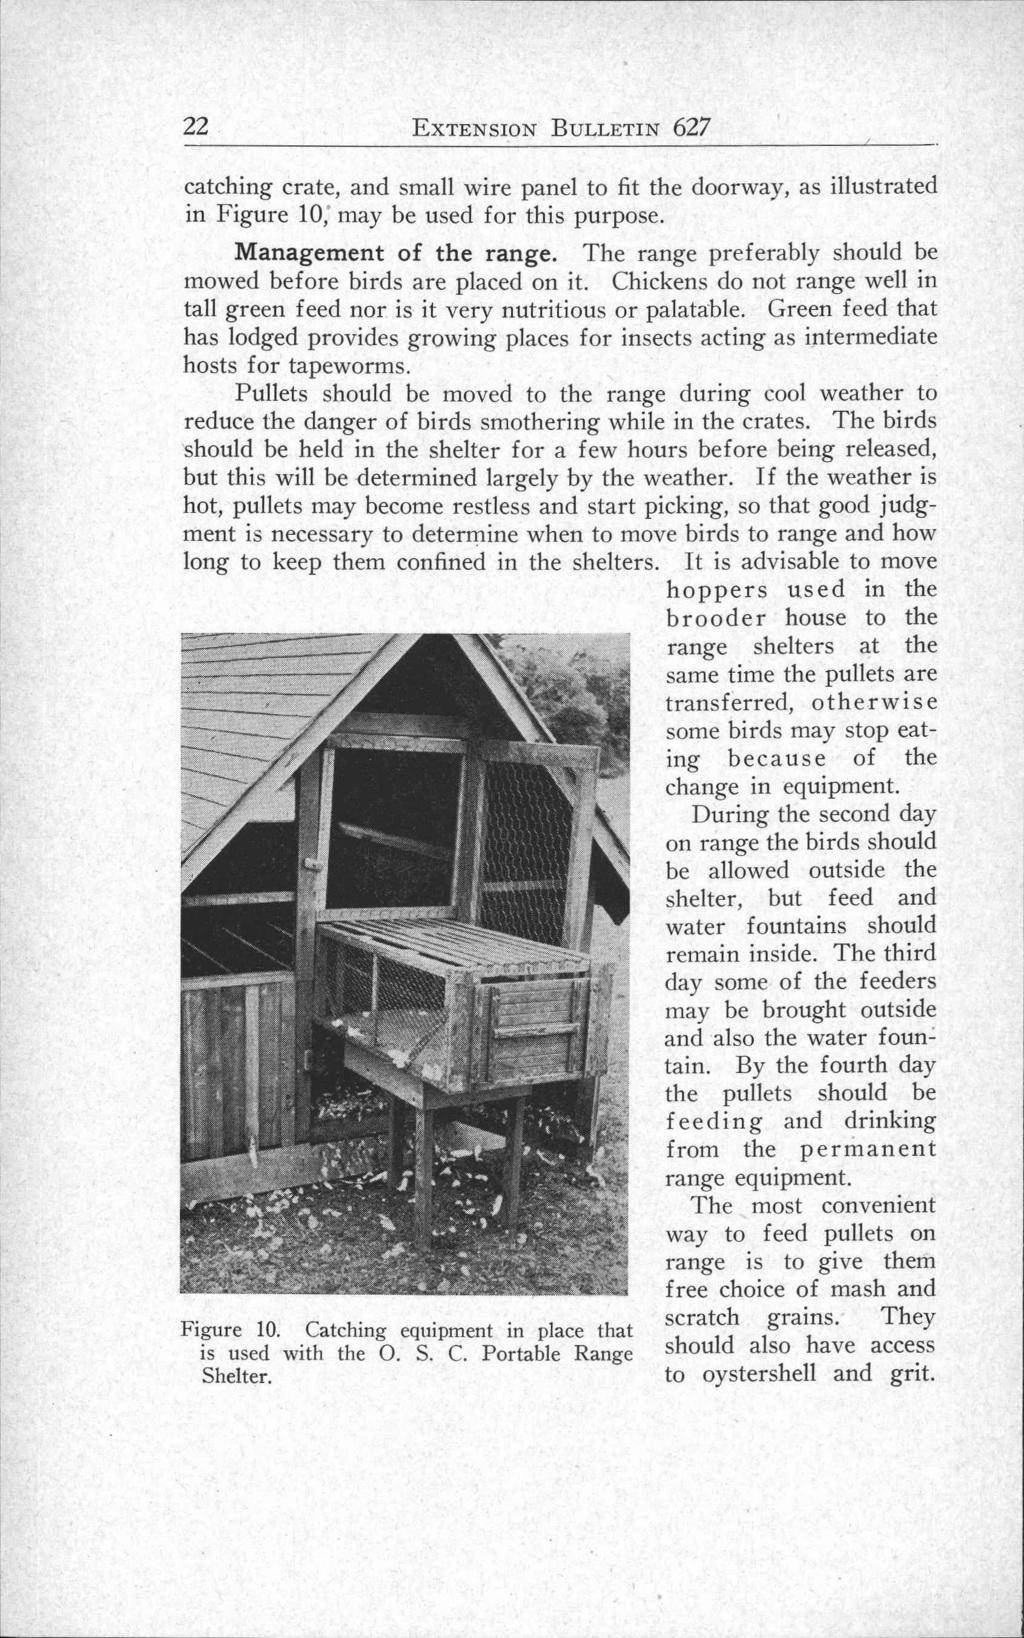 22 EXTENSION BULLETIN 627 catching crate, and small wire panel to fit the doorway, as illustrated in Figure 10; may be used for this purpose. Management of the range.